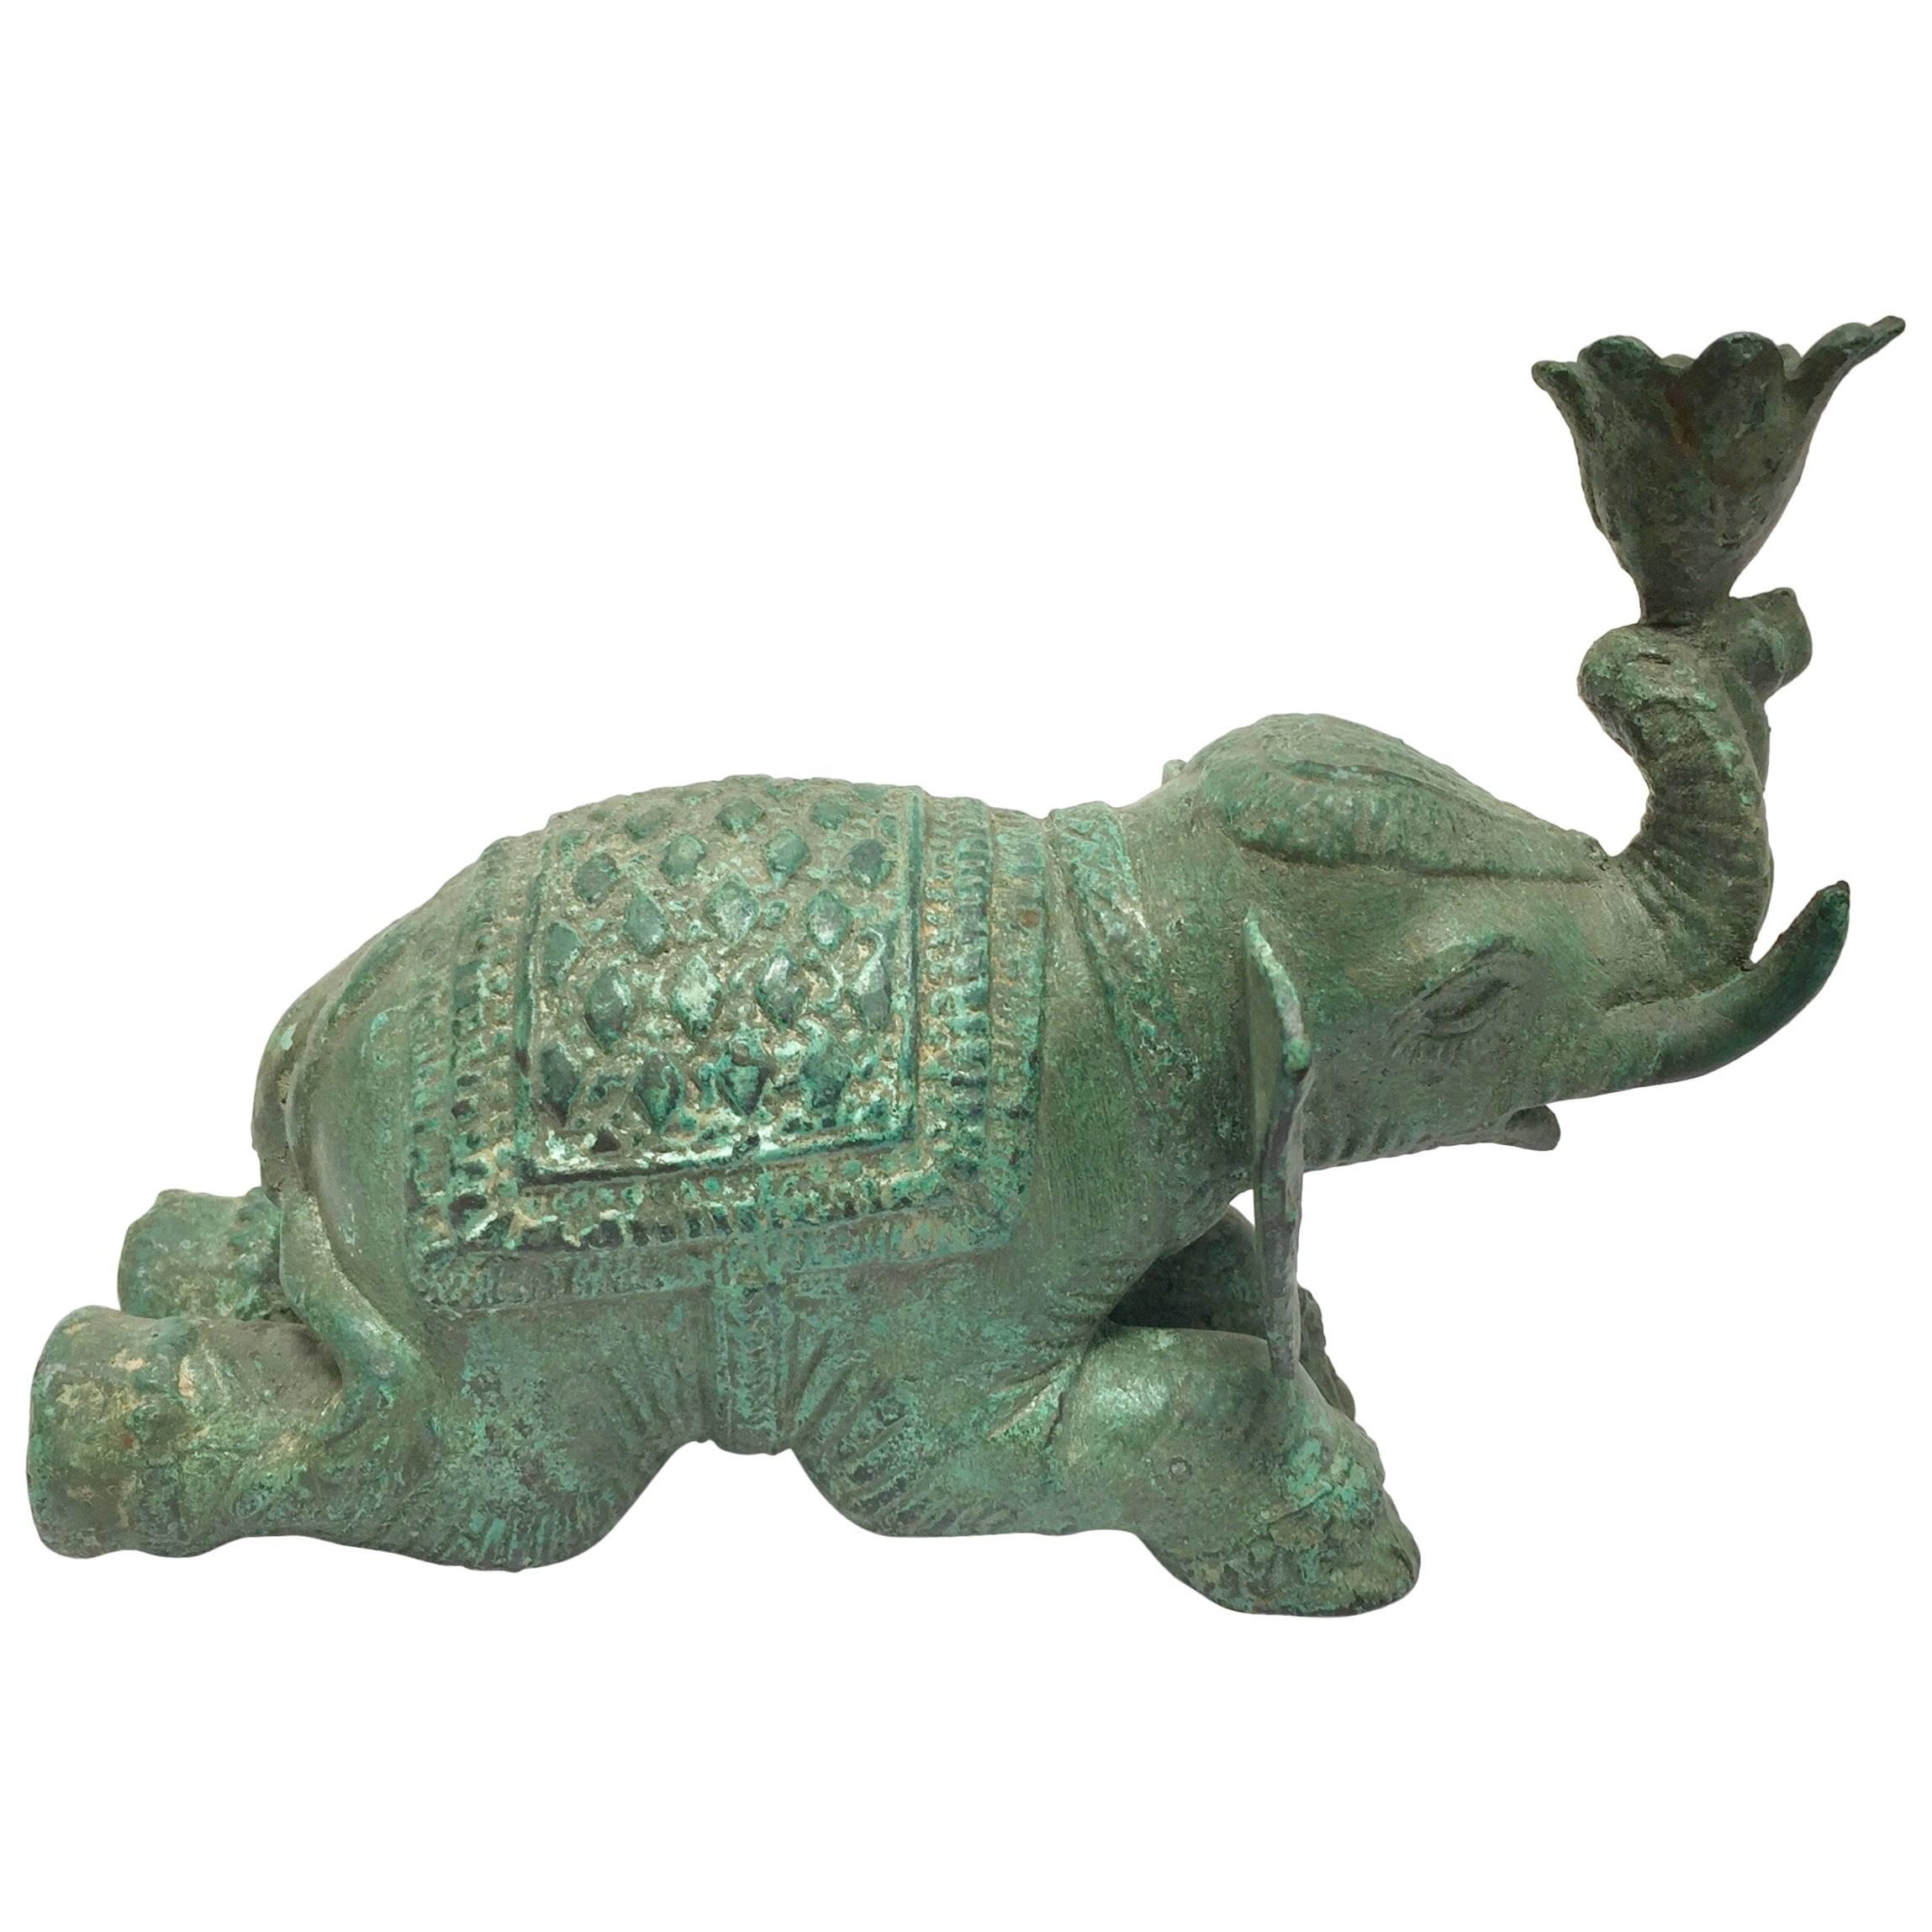 Vintage Patinated Green Metal Sculpture of an Elephant